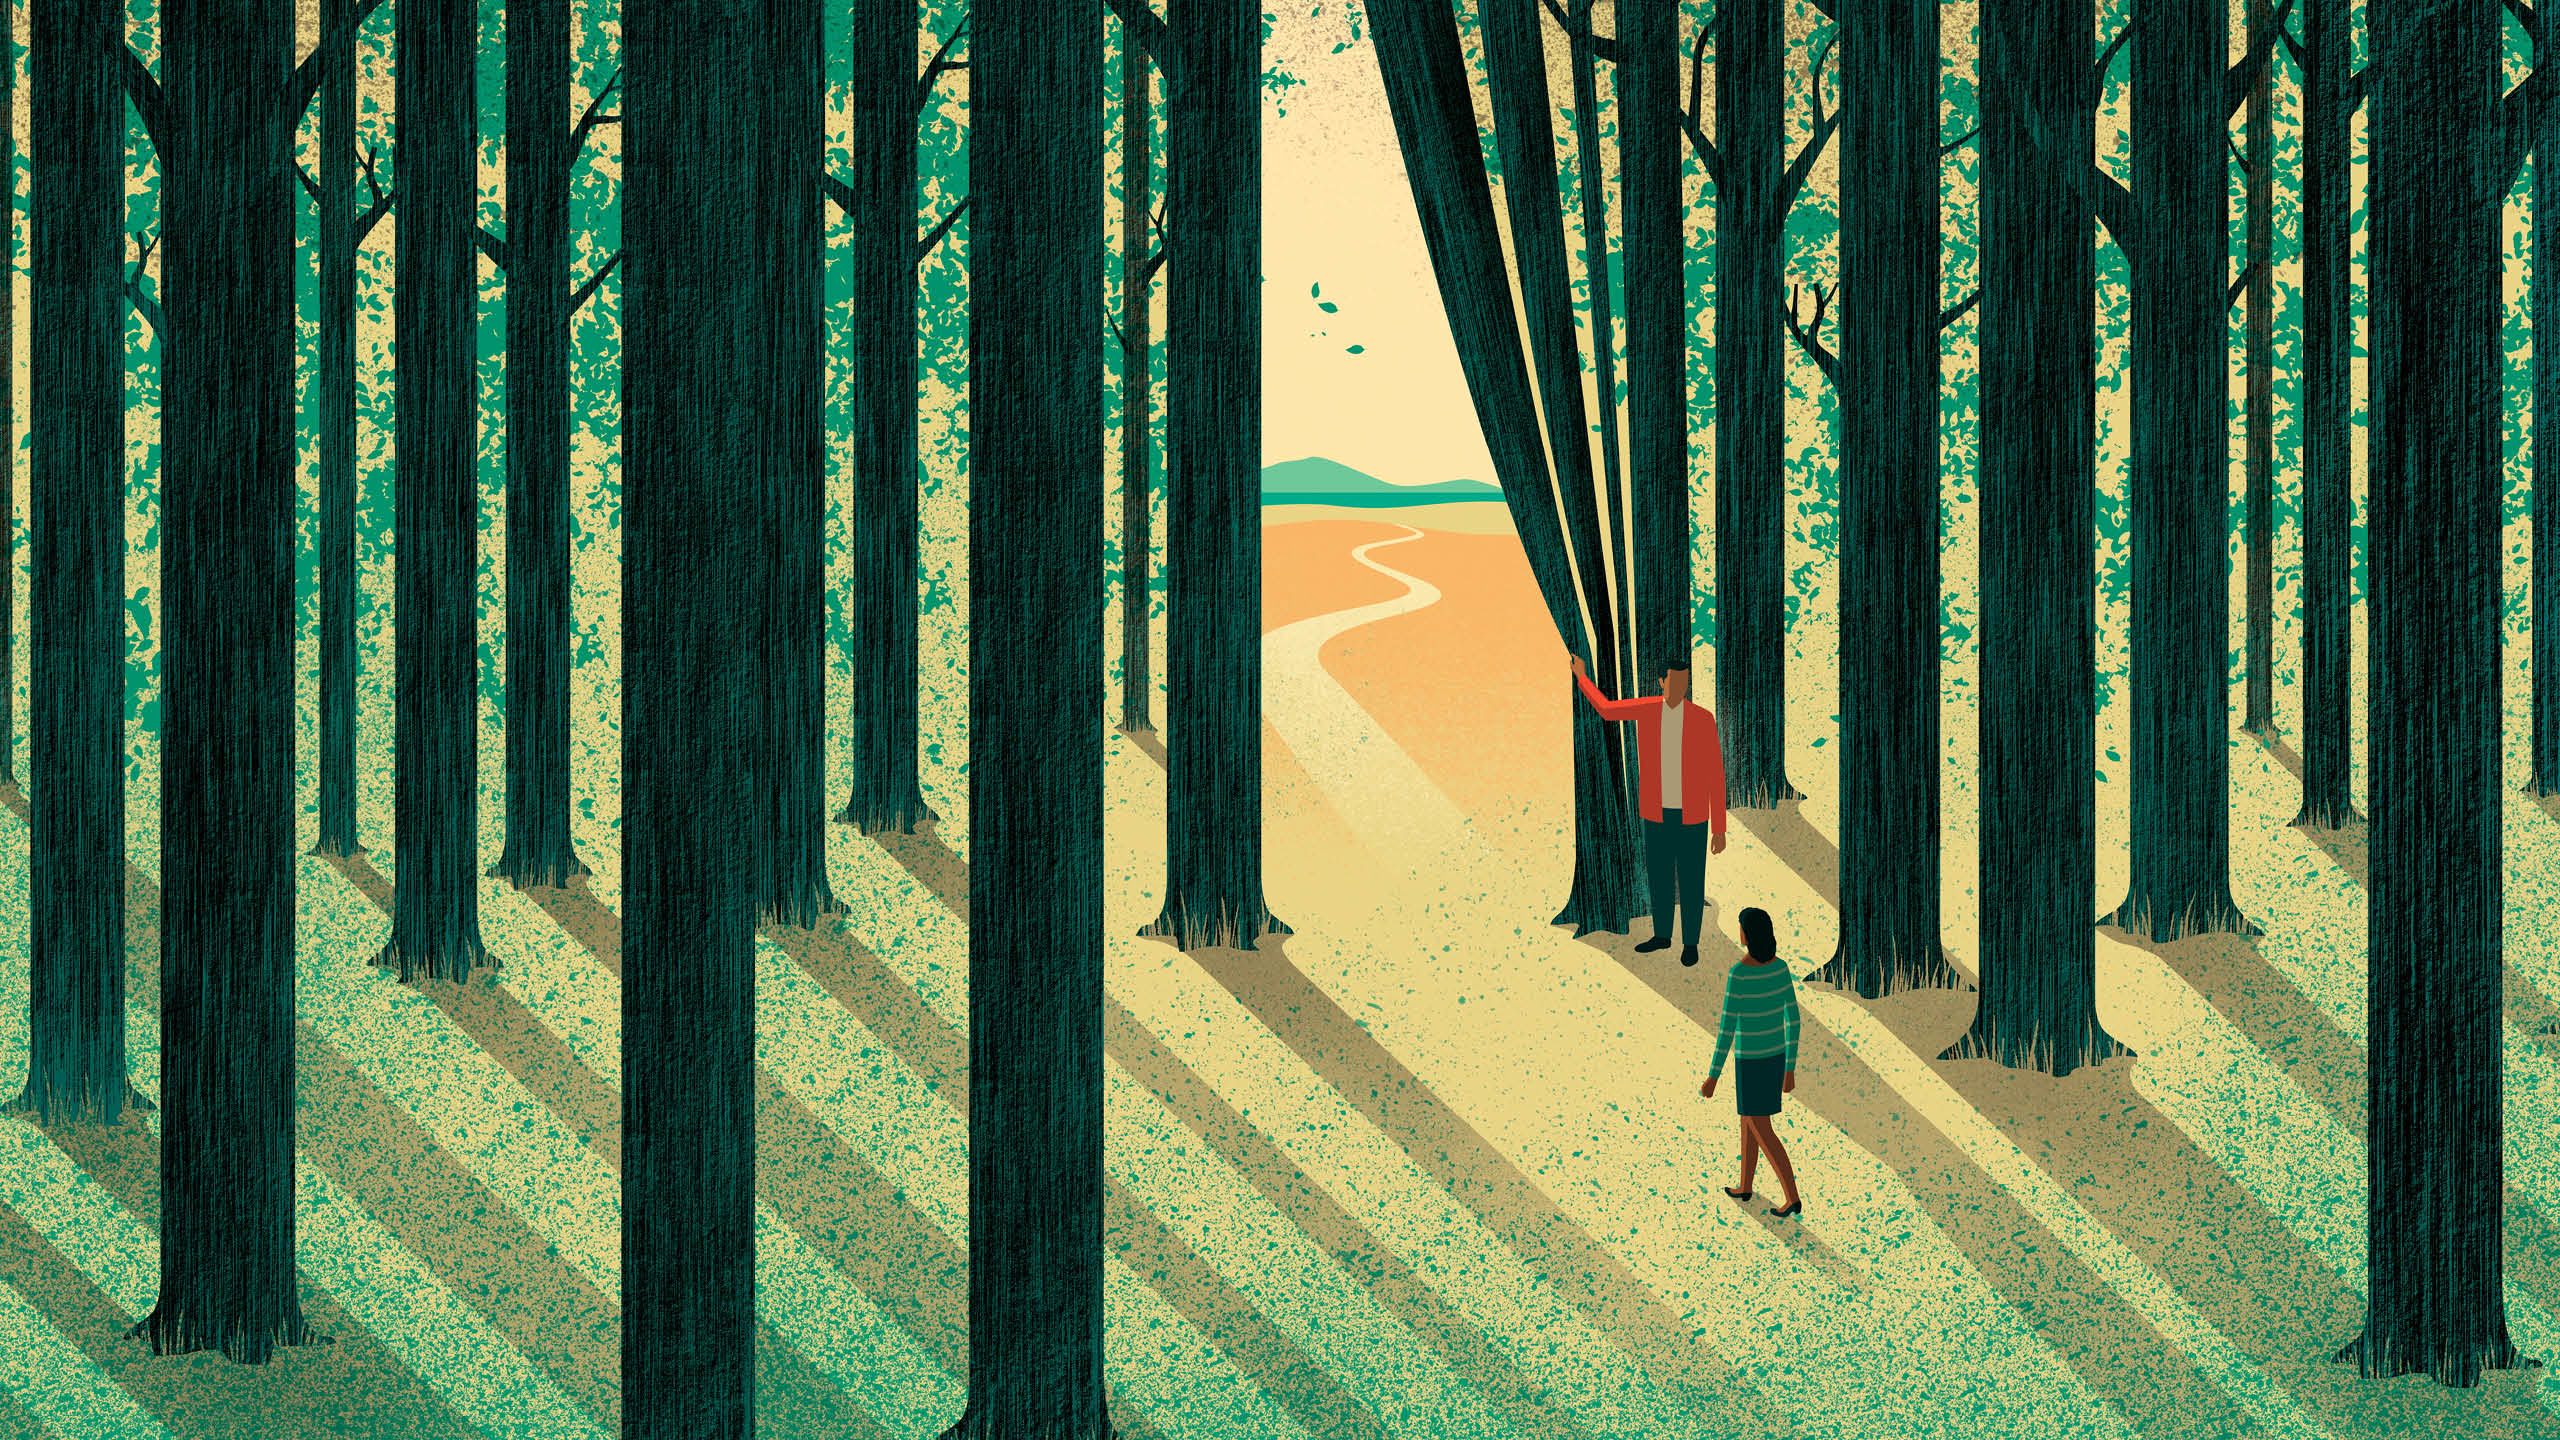 An illustration of a man parting a "curtain of trees" in a forest for a woman to walk through the opening, with a winding path leading to a distant horizon.